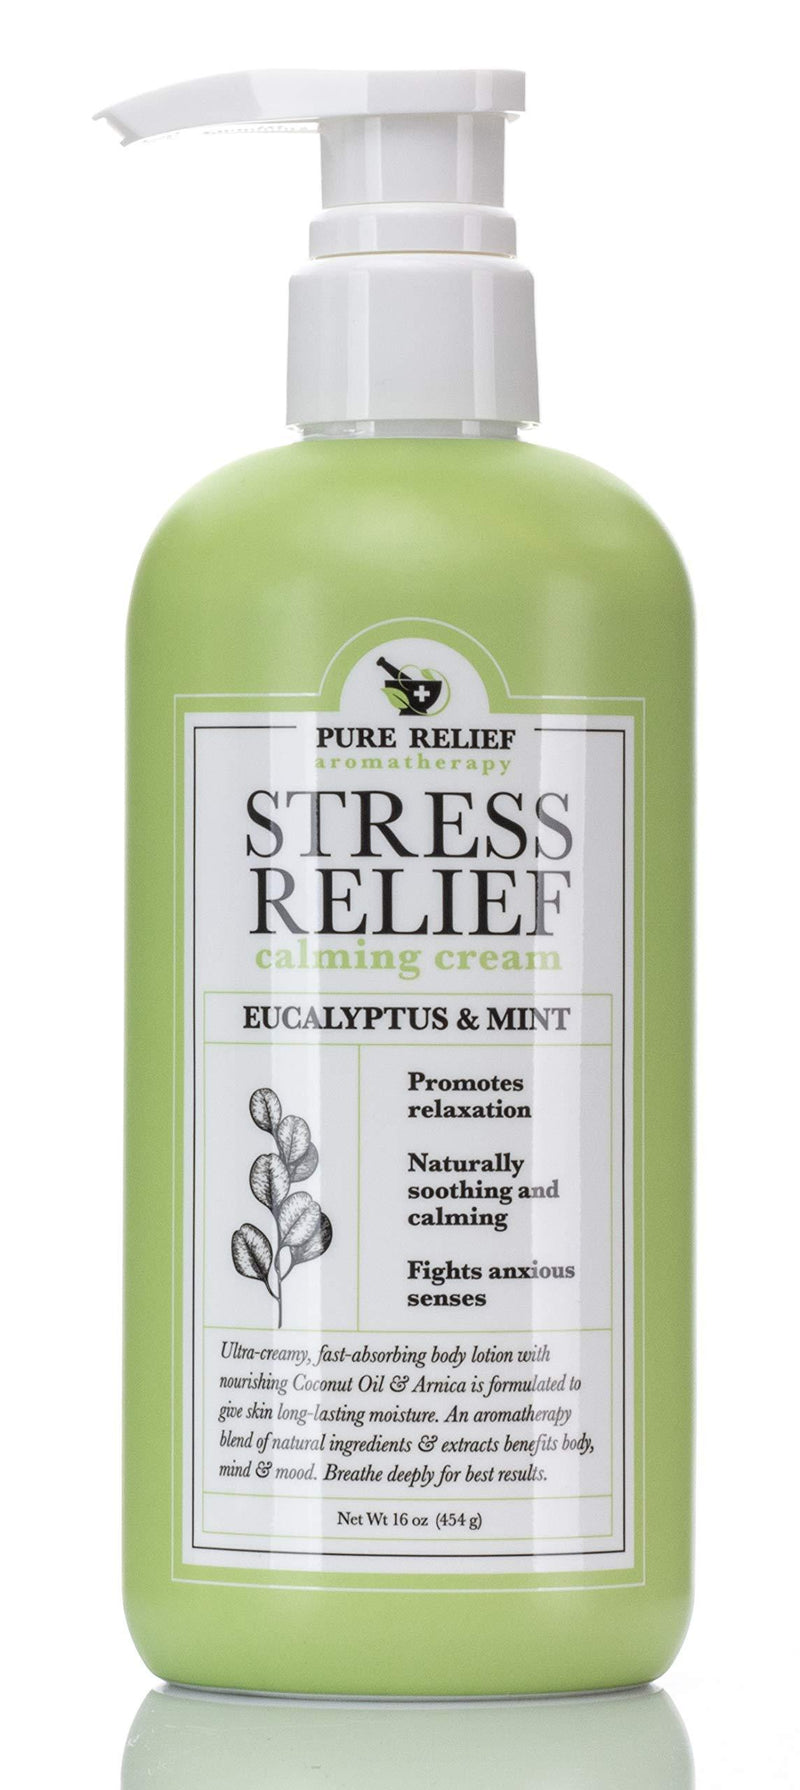 [Australia] - Stress Relief Calming Body Cream Eucalyptus-and-Mint Aromatherapy Body Lotion with Arnica, Coconut Oil Hydrating Natural Extracts Moisturize All Skin Types & Soothe Senses by Pure Relief, 16 Oz. 